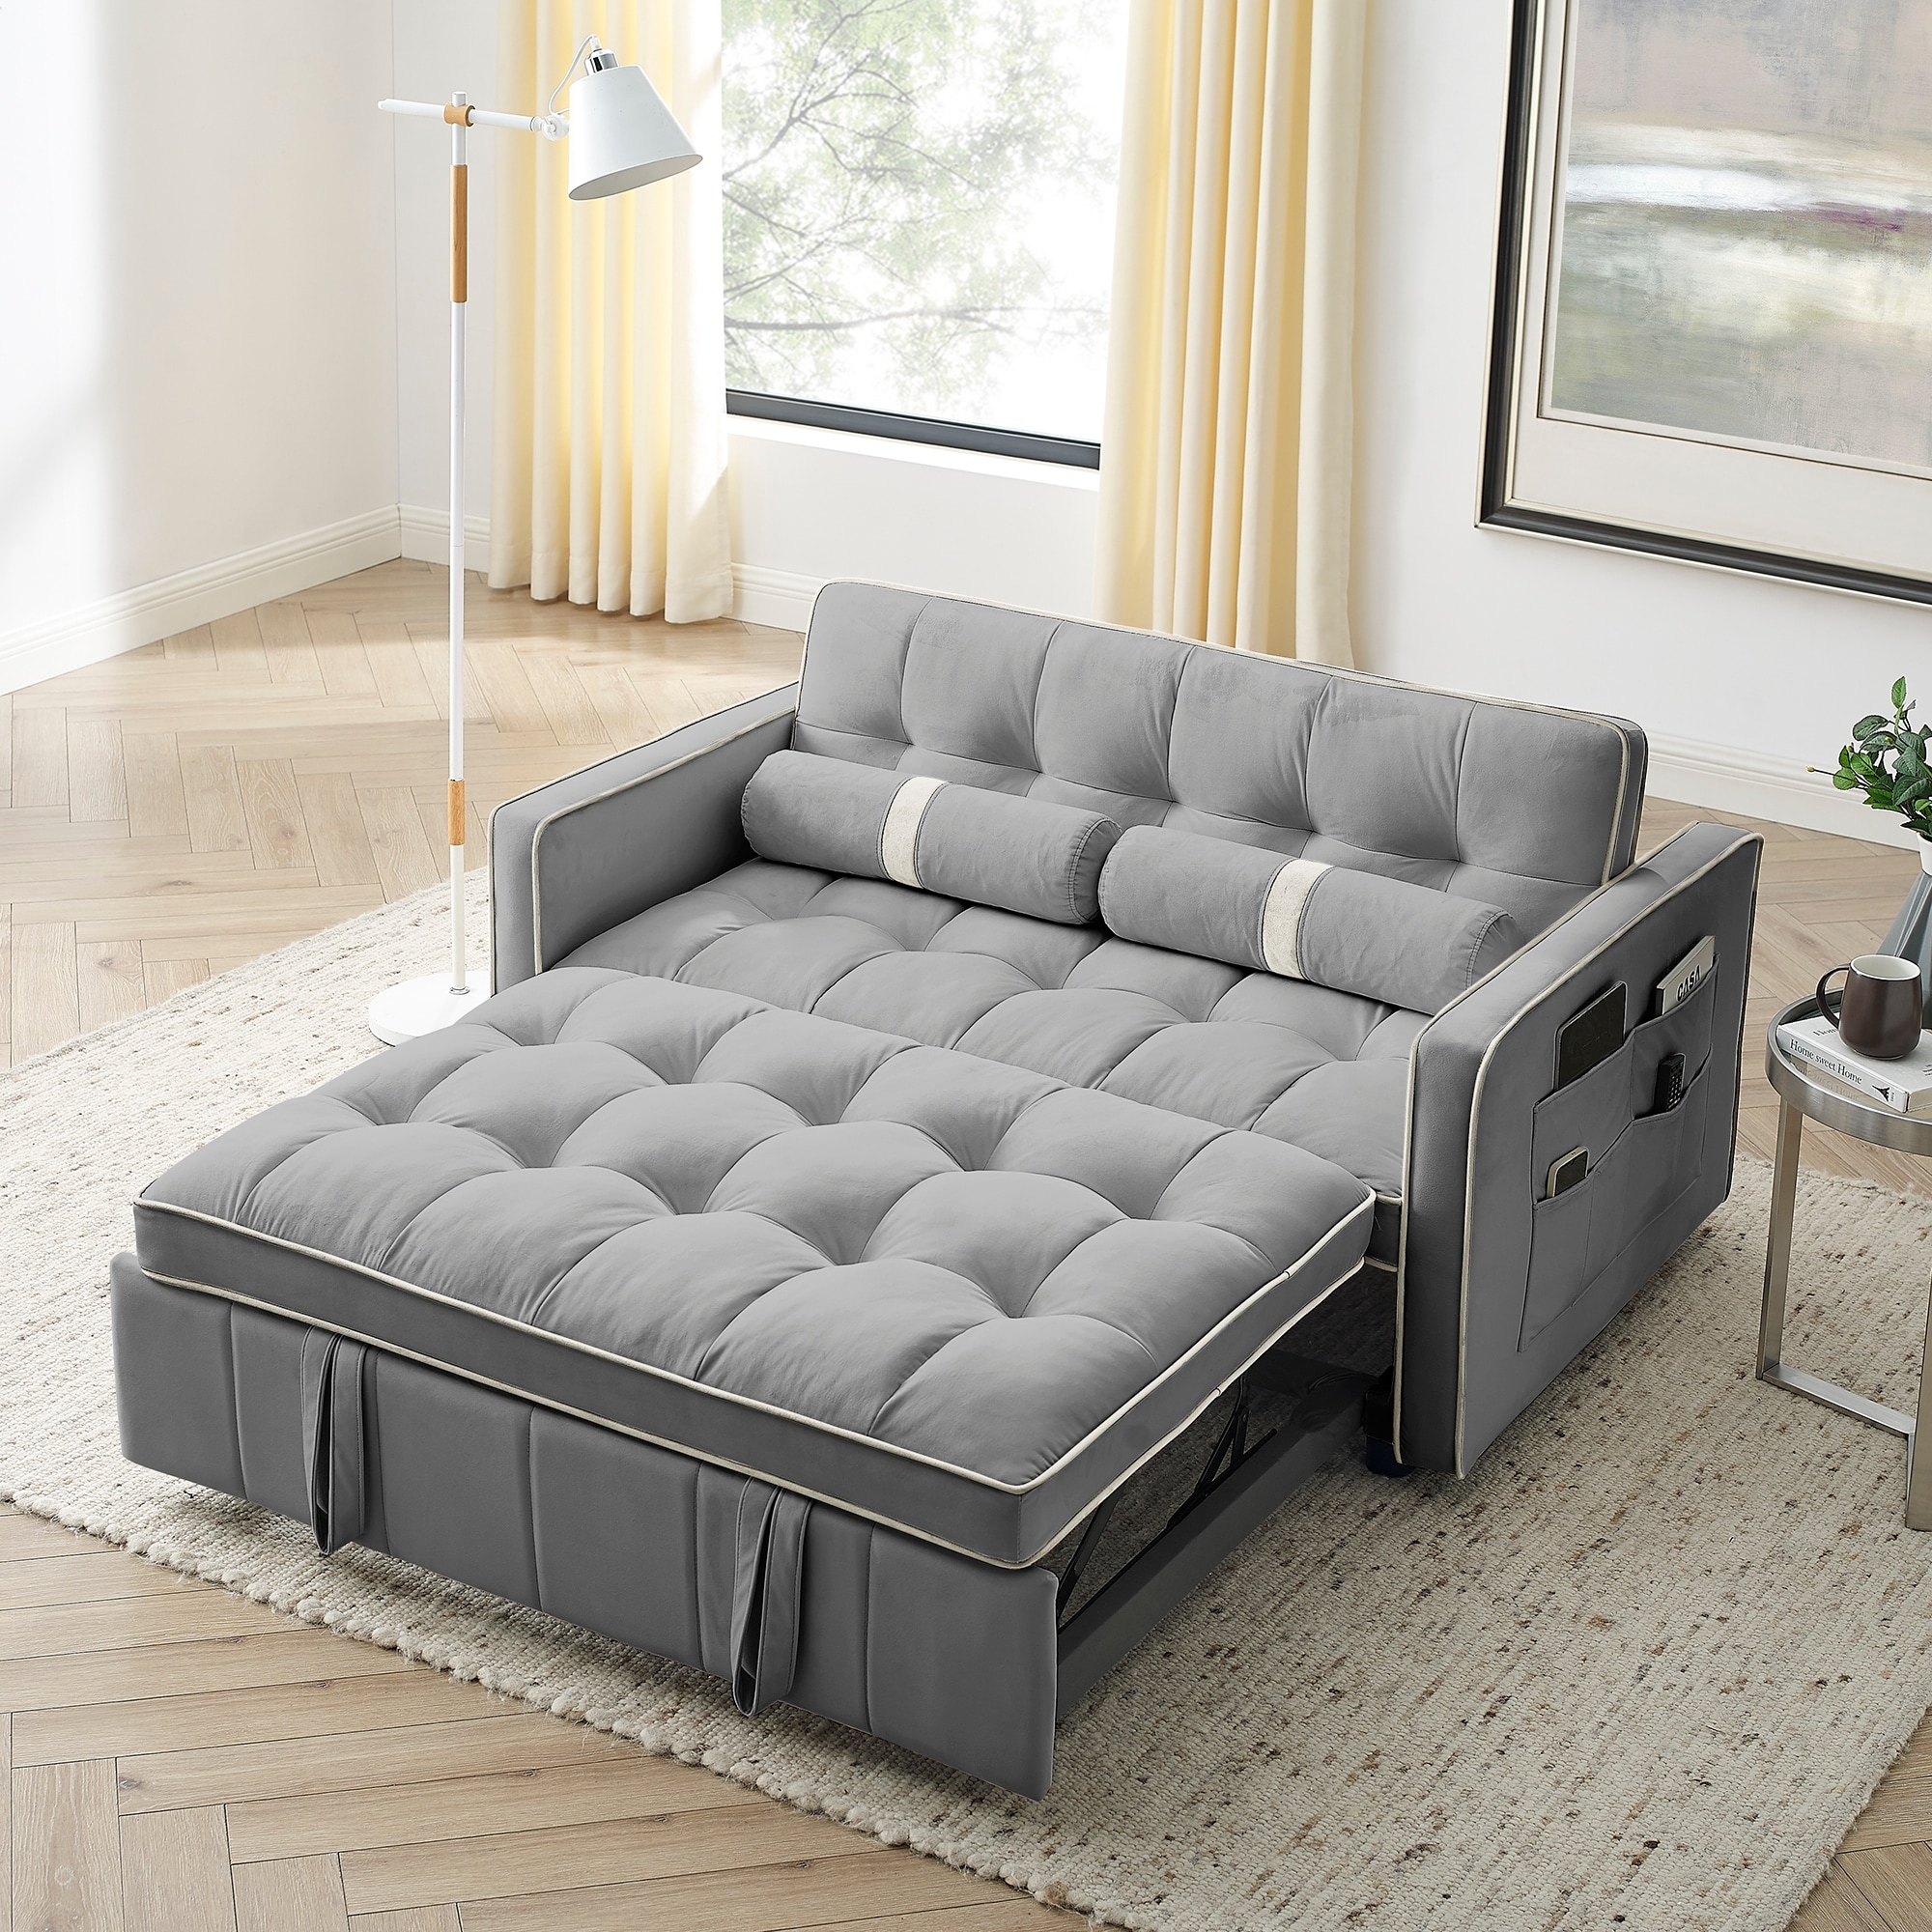 https://ak1.ostkcdn.com/images/products/is/images/direct/f60d852fd922ea7929073023f1057eb0cd8a61bb/55.5%22-Pull-Out-Sofa-Bed%2C-2-Seater-Loveseats-Sofa-Couch-with-side-pockets%2C-Adjsutable-Backrest-and-Lumbar-Pillows.jpg